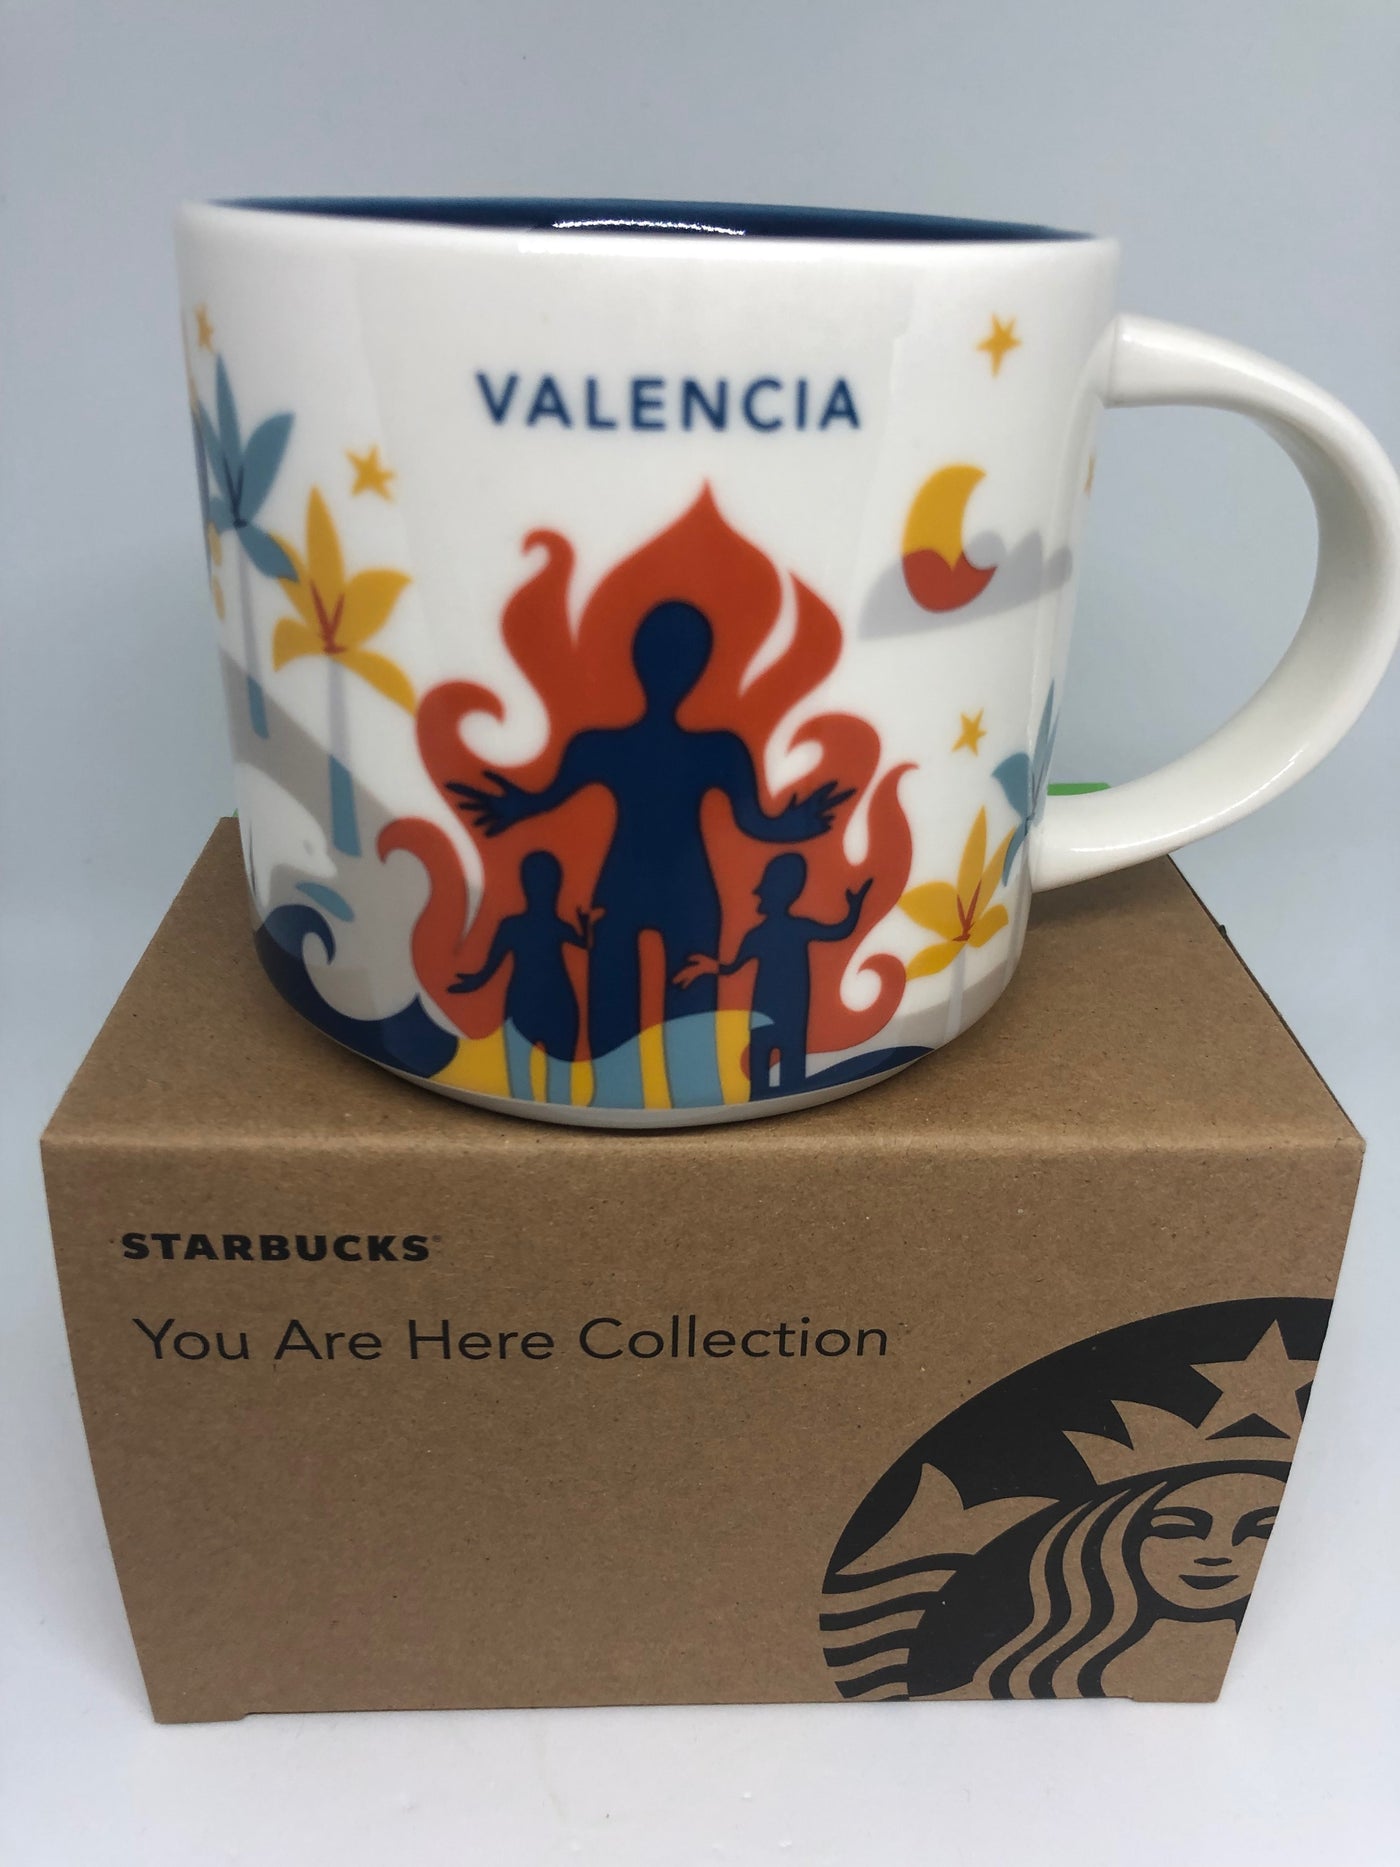 Starbucks You Are Here Collection Spain Valencia Ceramic Coffee Mug New with Box